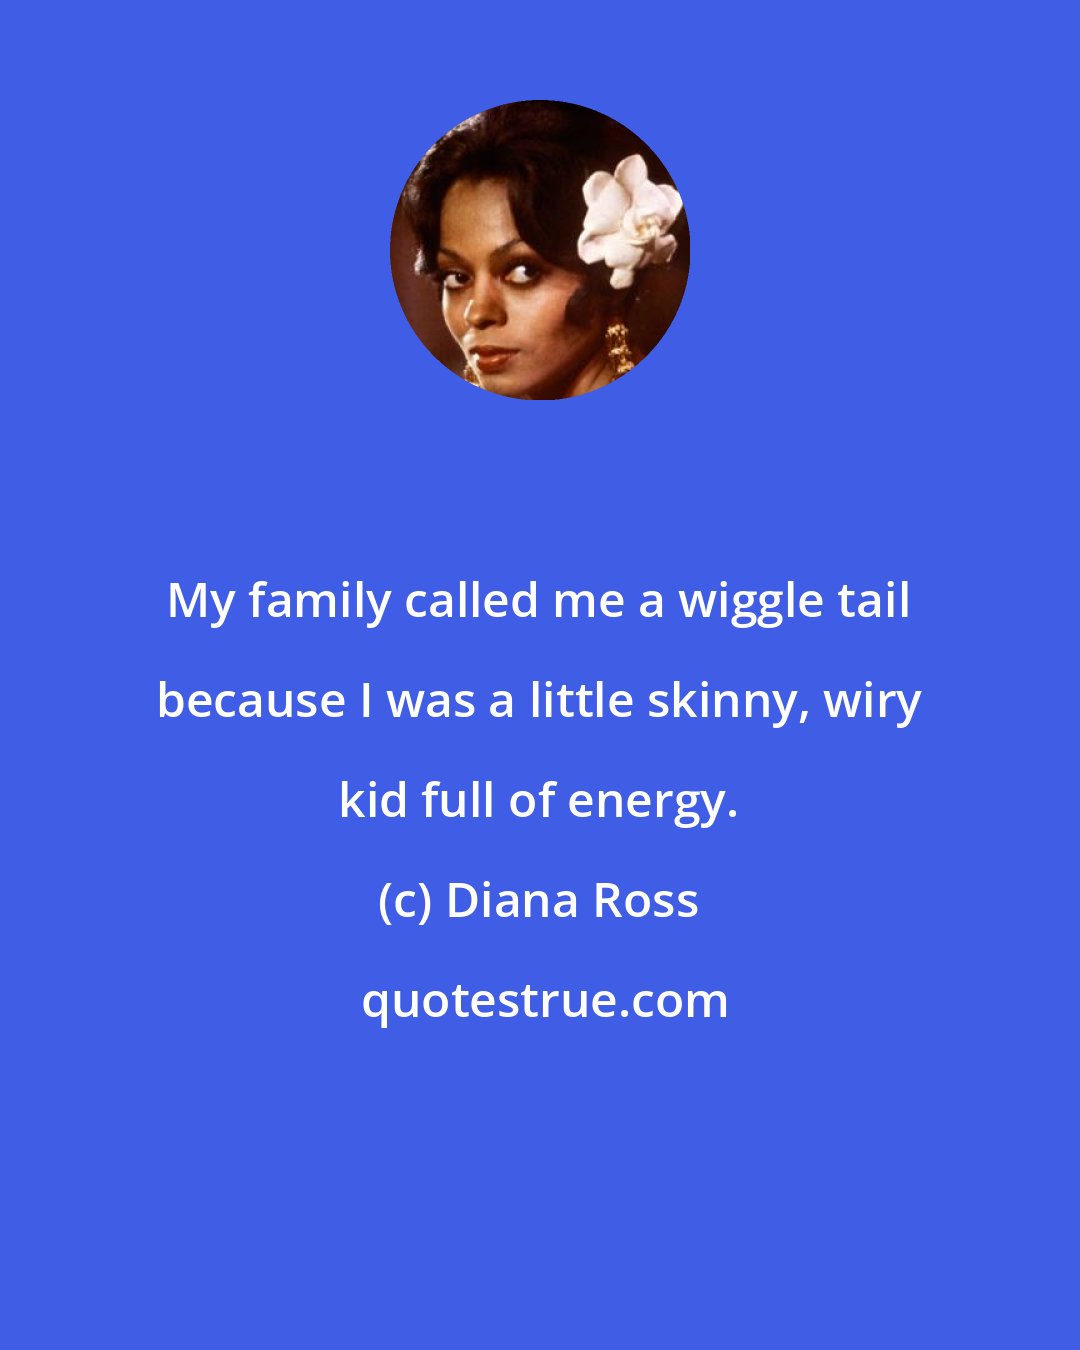 Diana Ross: My family called me a wiggle tail because I was a little skinny, wiry kid full of energy.